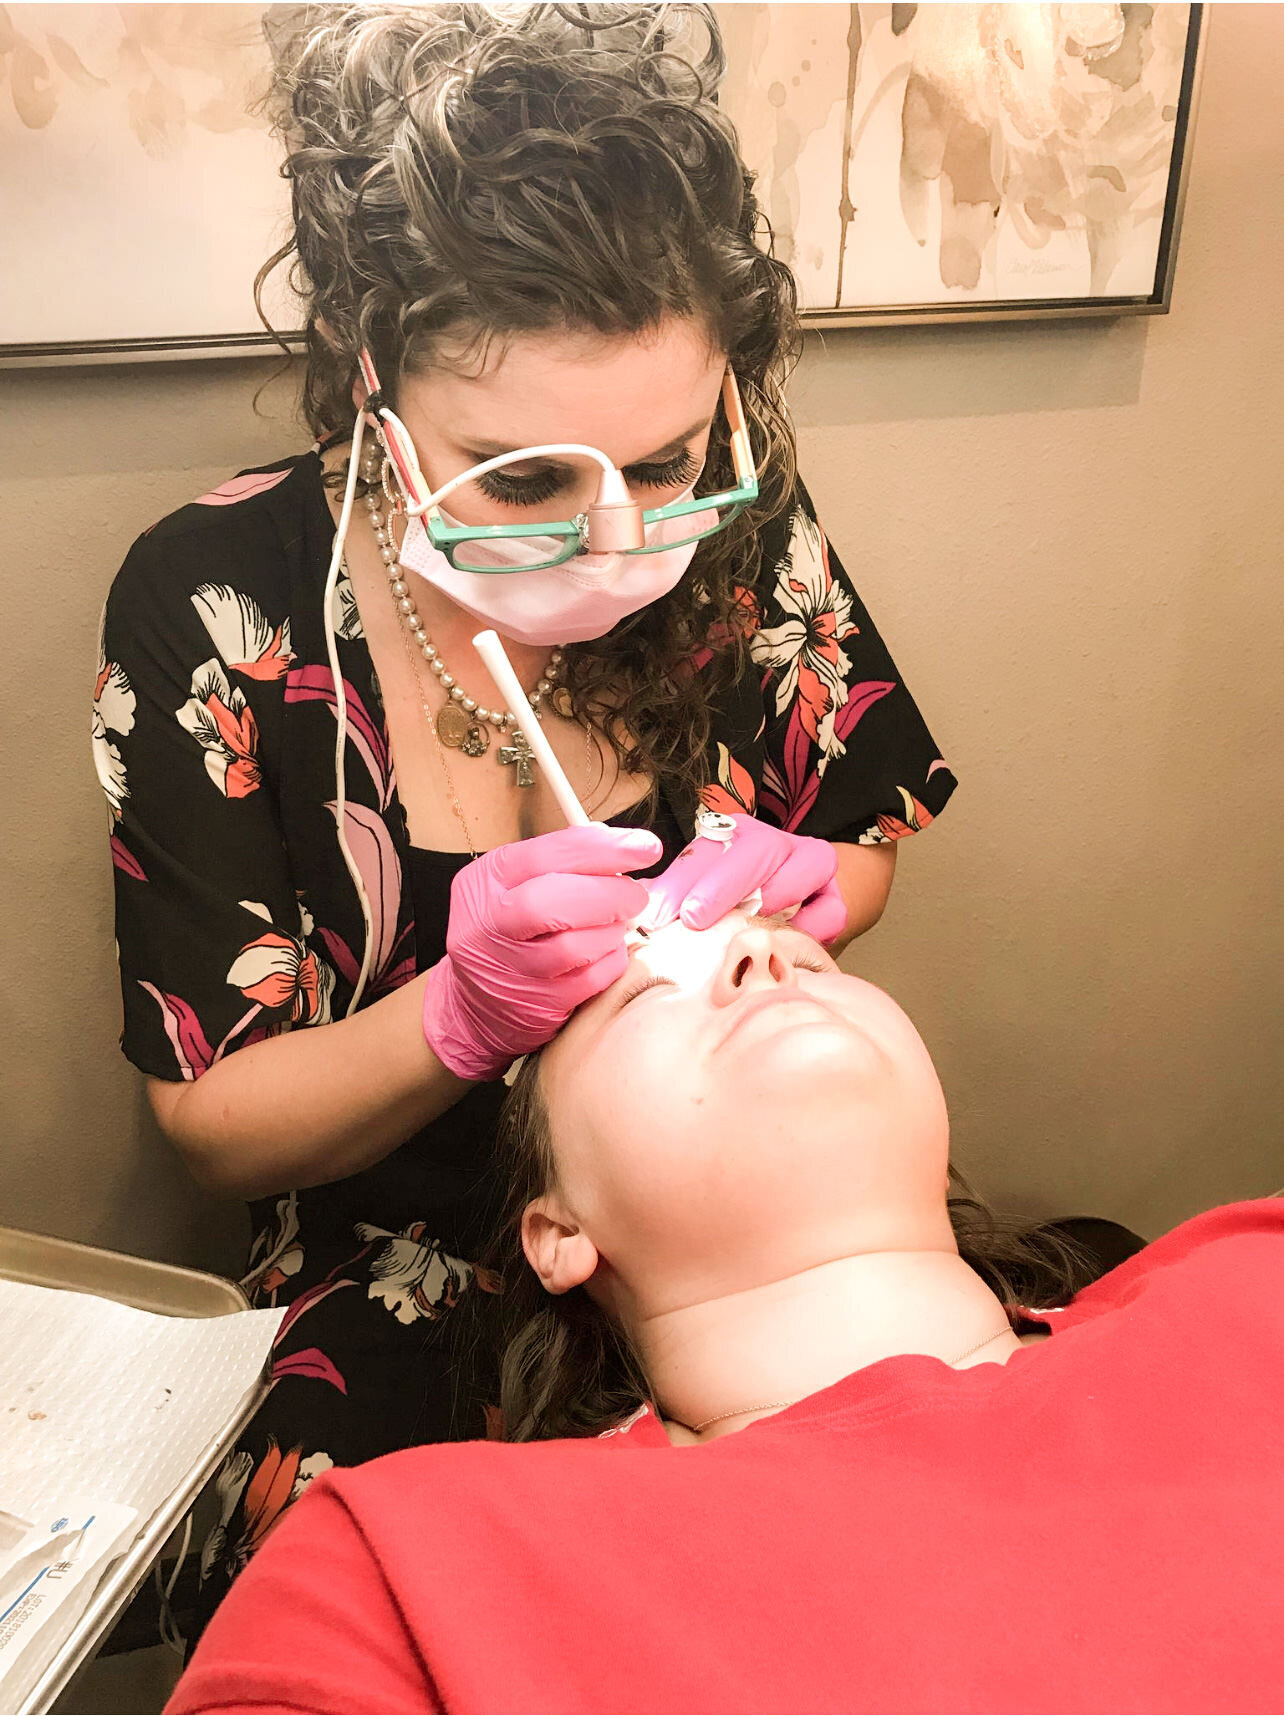 Training and Artistry in Microblading, Permanent Cosmetics and Eyelash Extensions